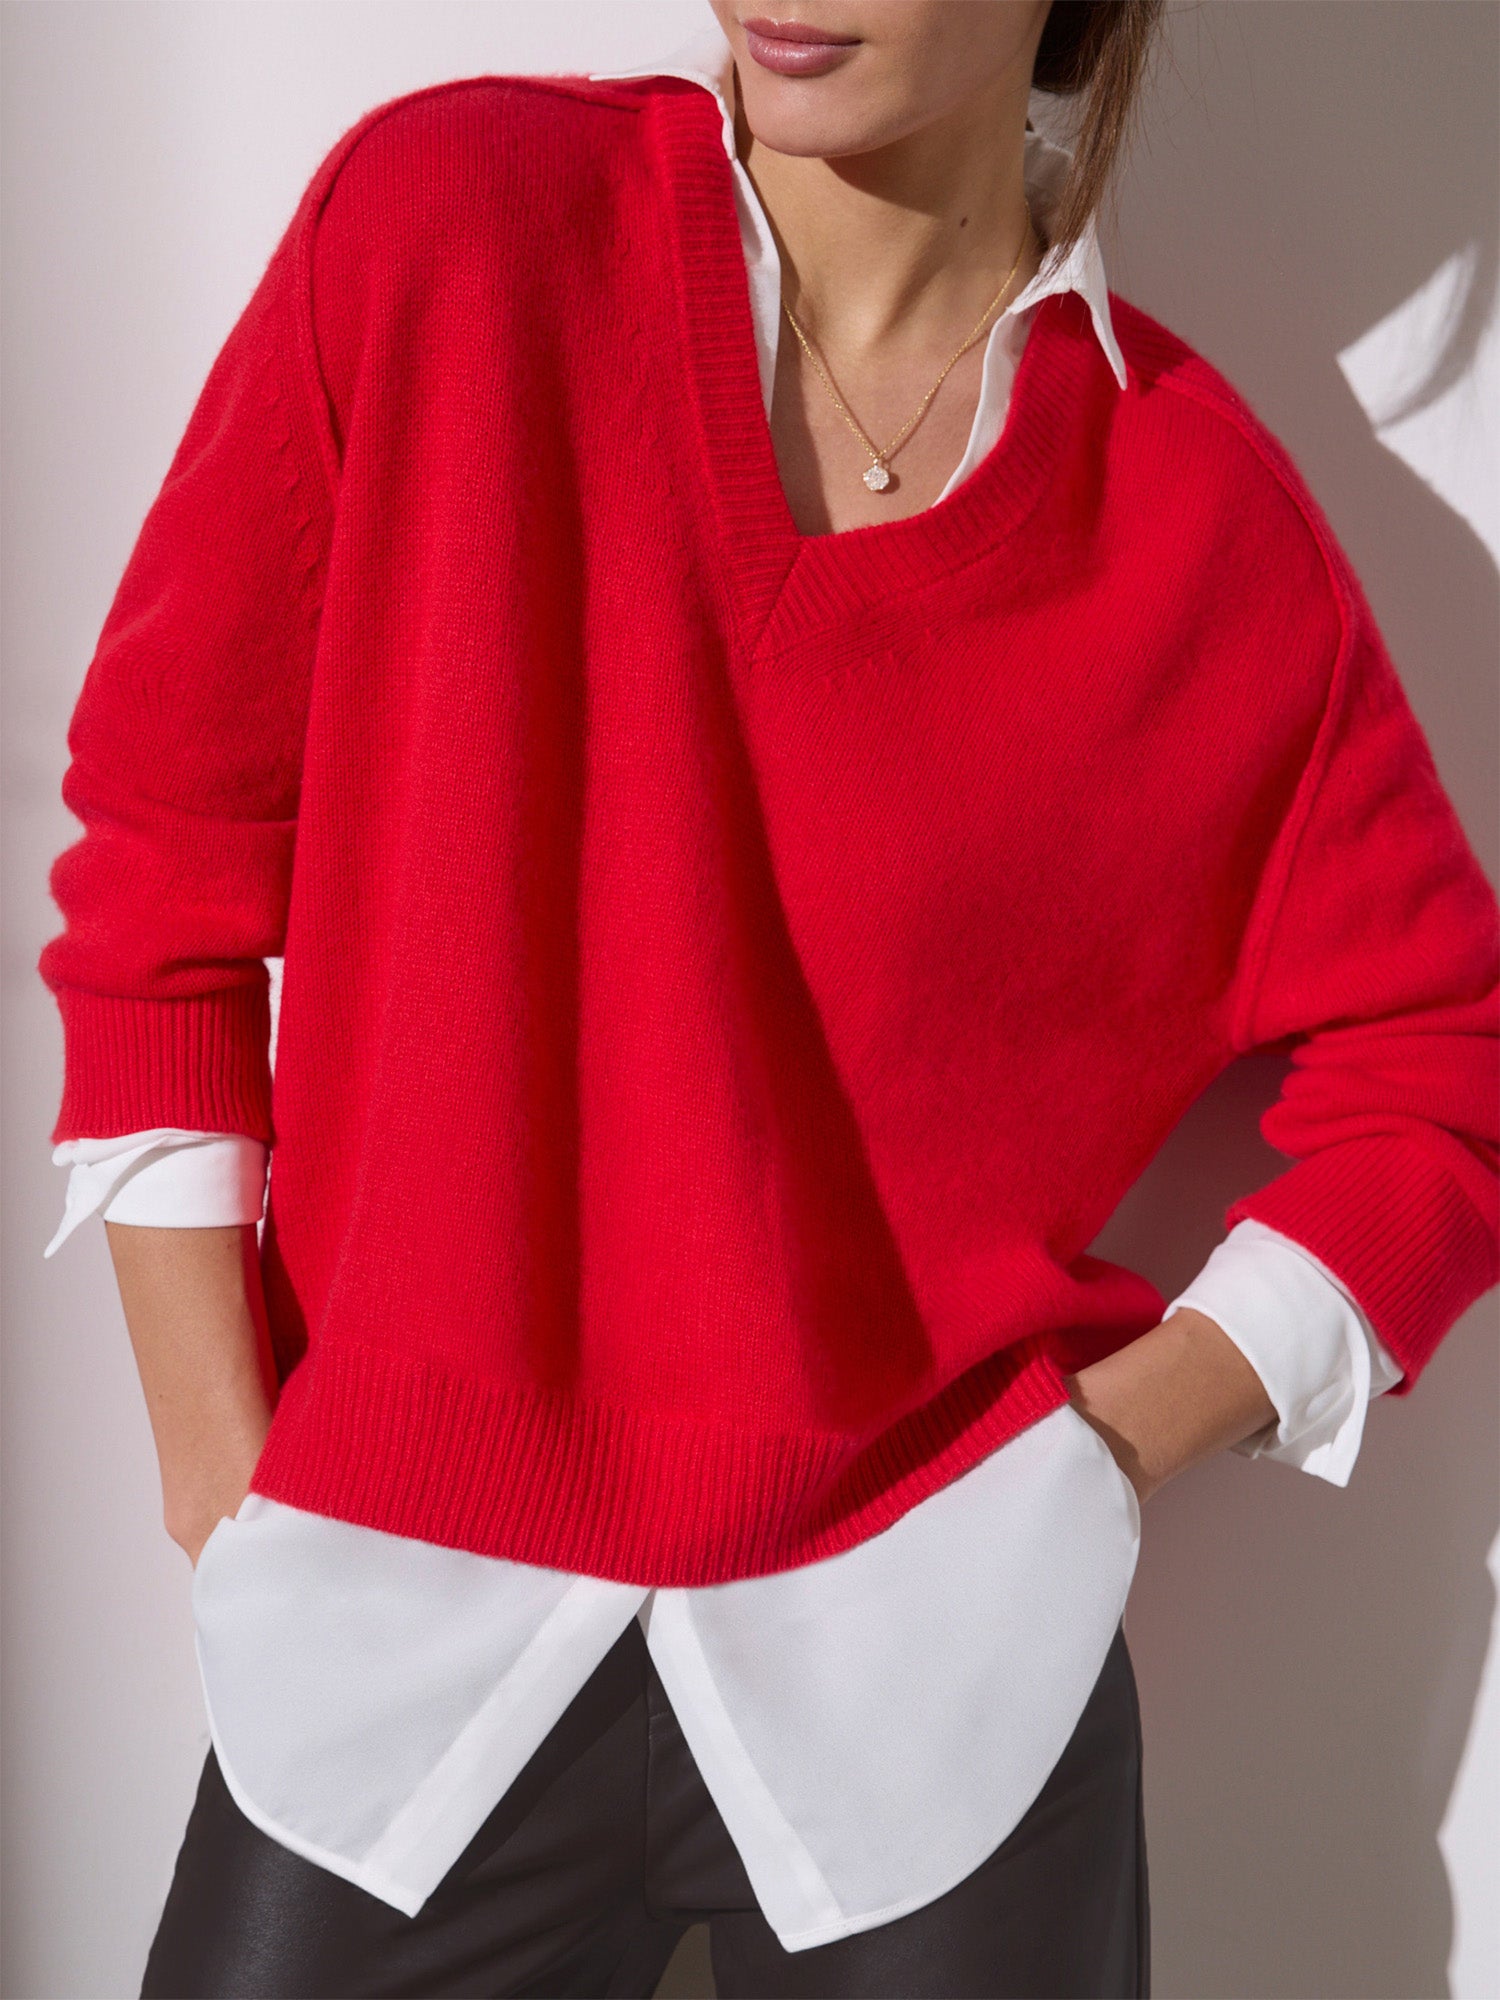 Looker red layered v-neck sweater front view